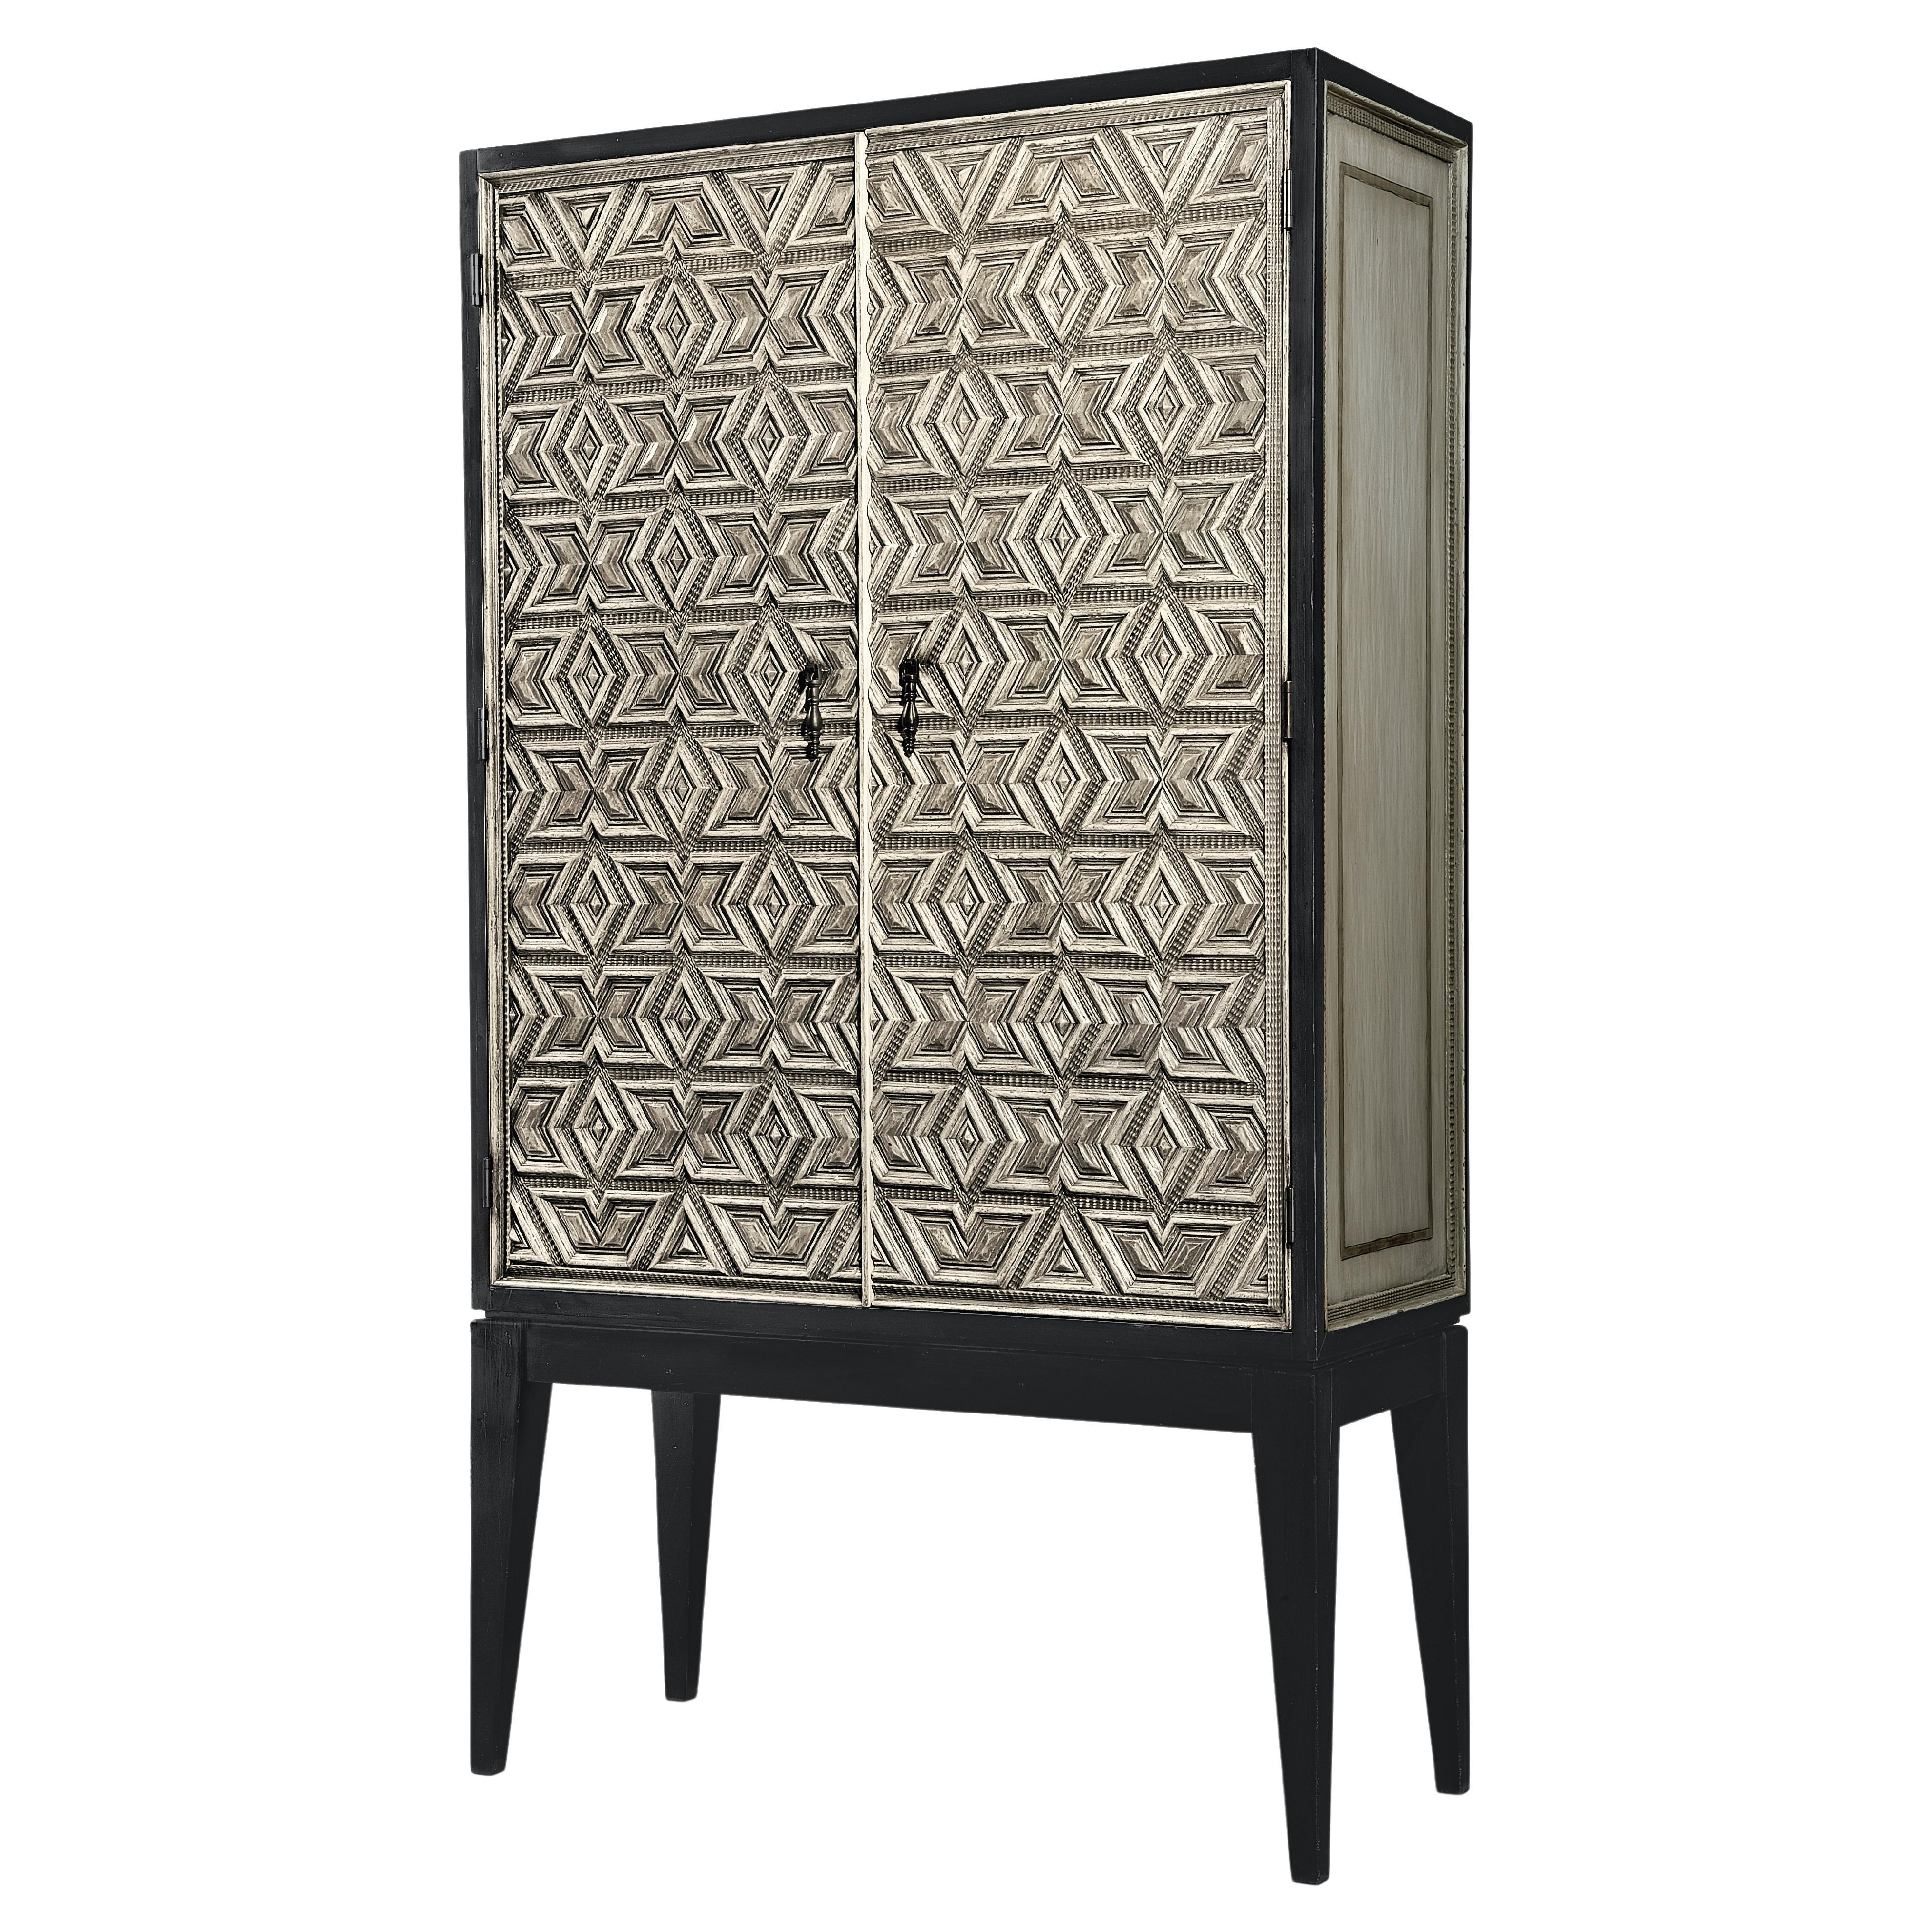 Queretano Armoire, a Statement Piece with Intricate Wood Decoration and Iron